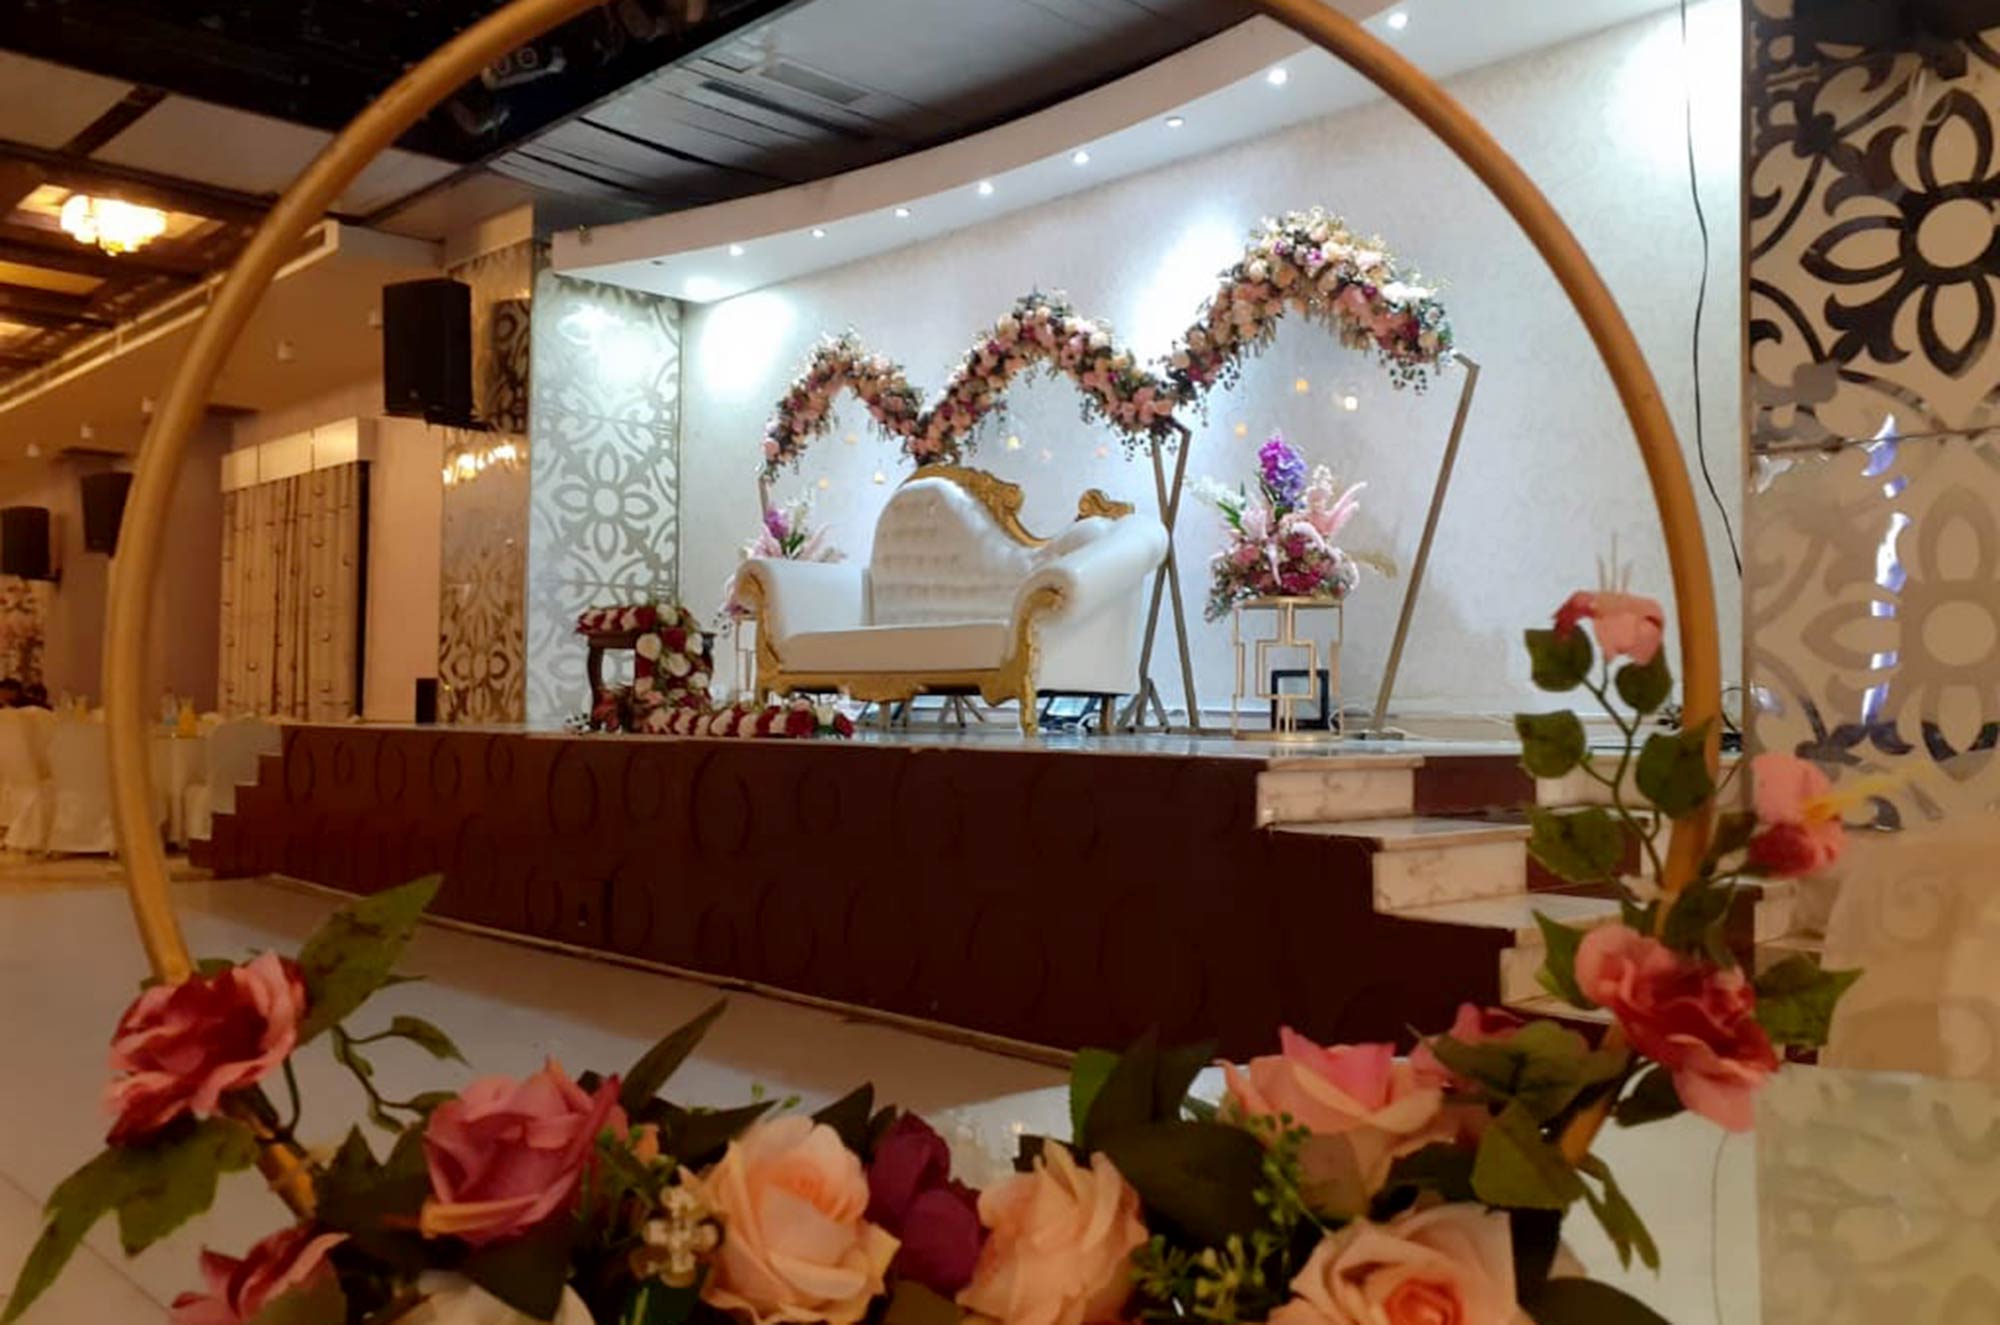 A wedding venue where Ahlam has been hired as the photographer.